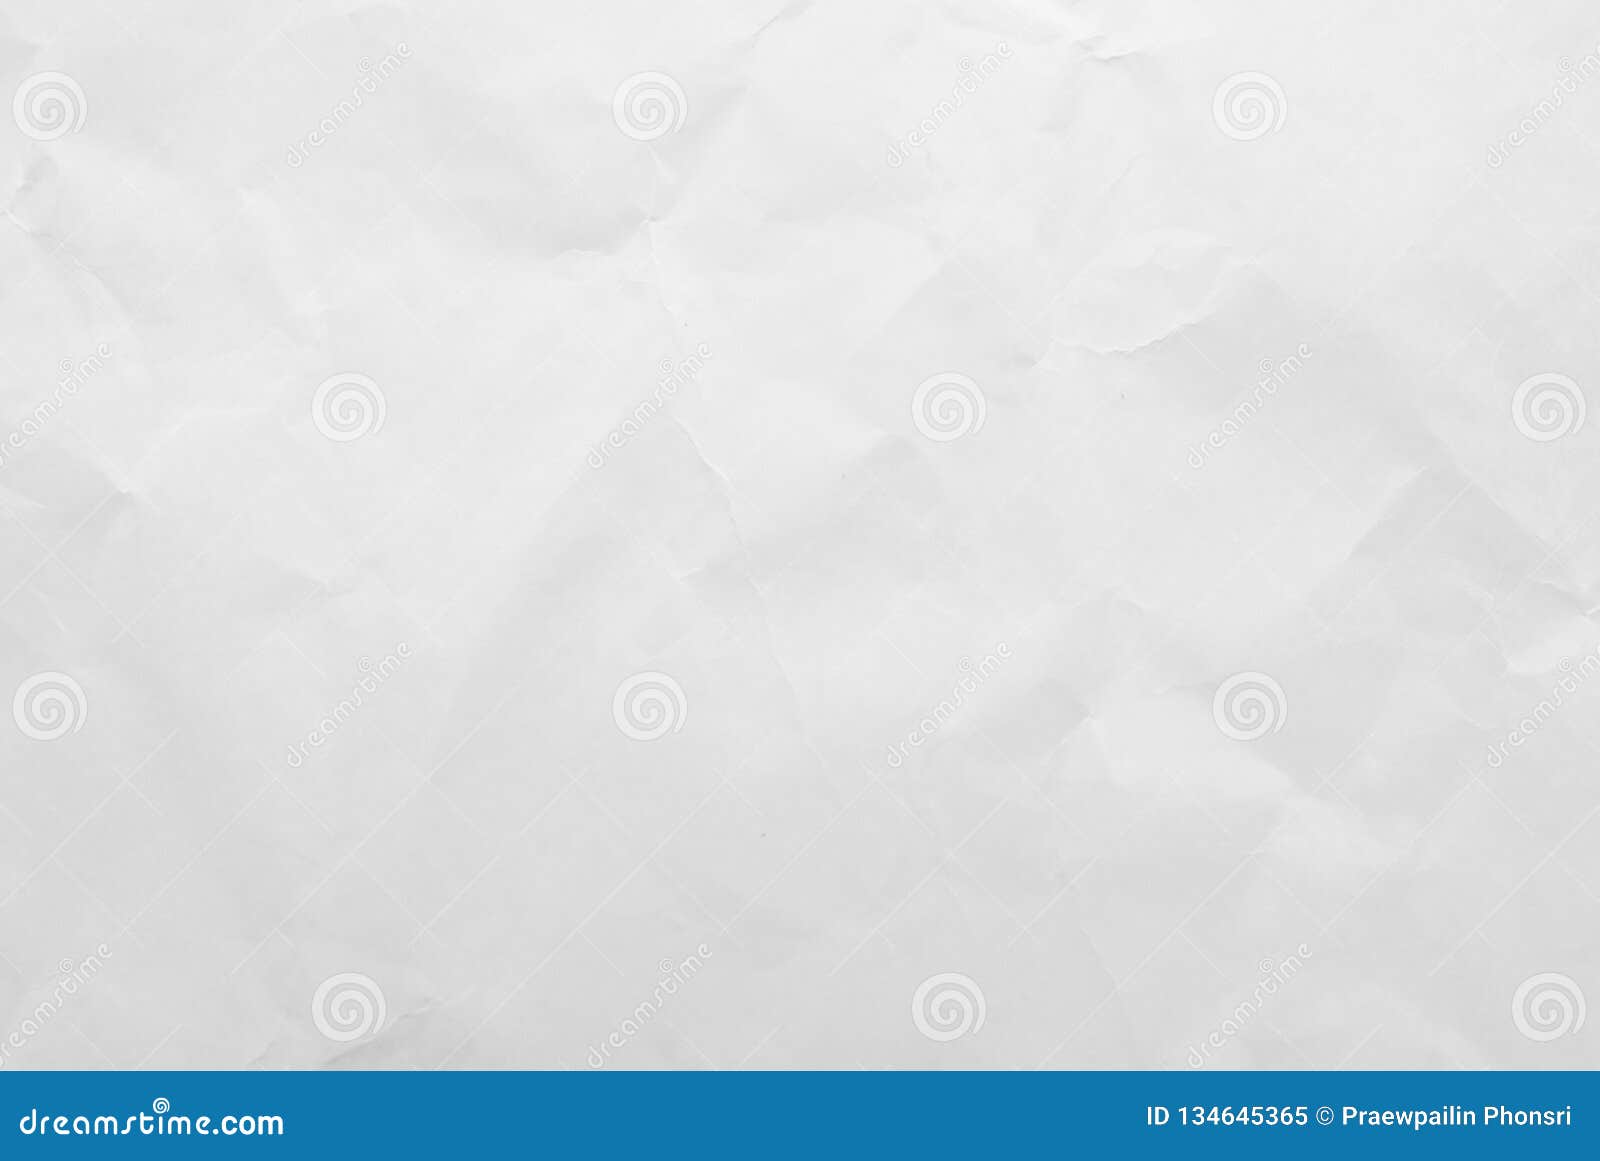 white crumpled paper texture background. close-up